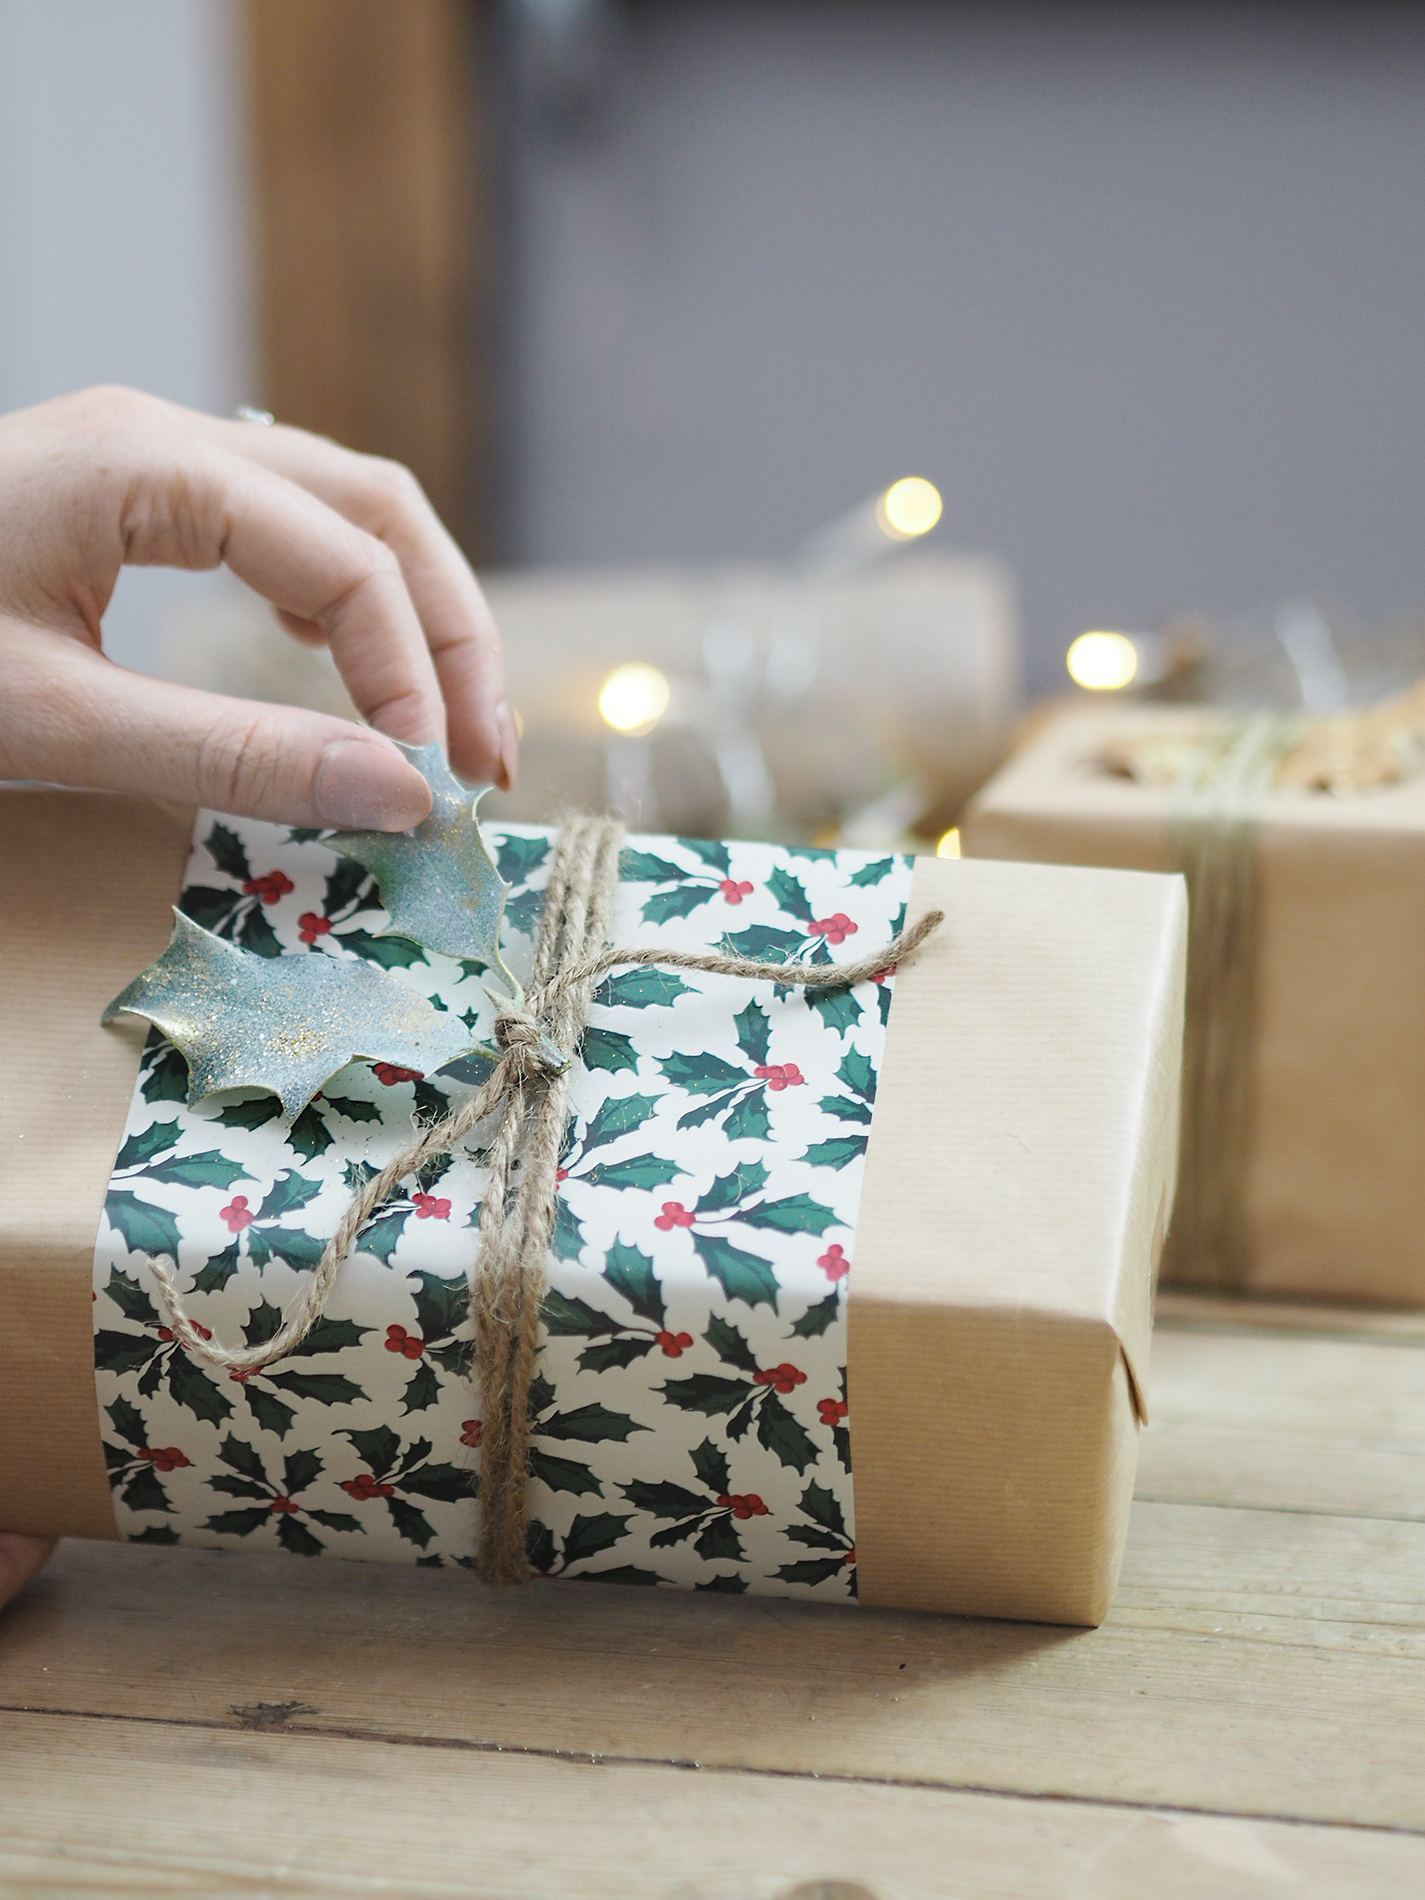 What is gift wrap called?